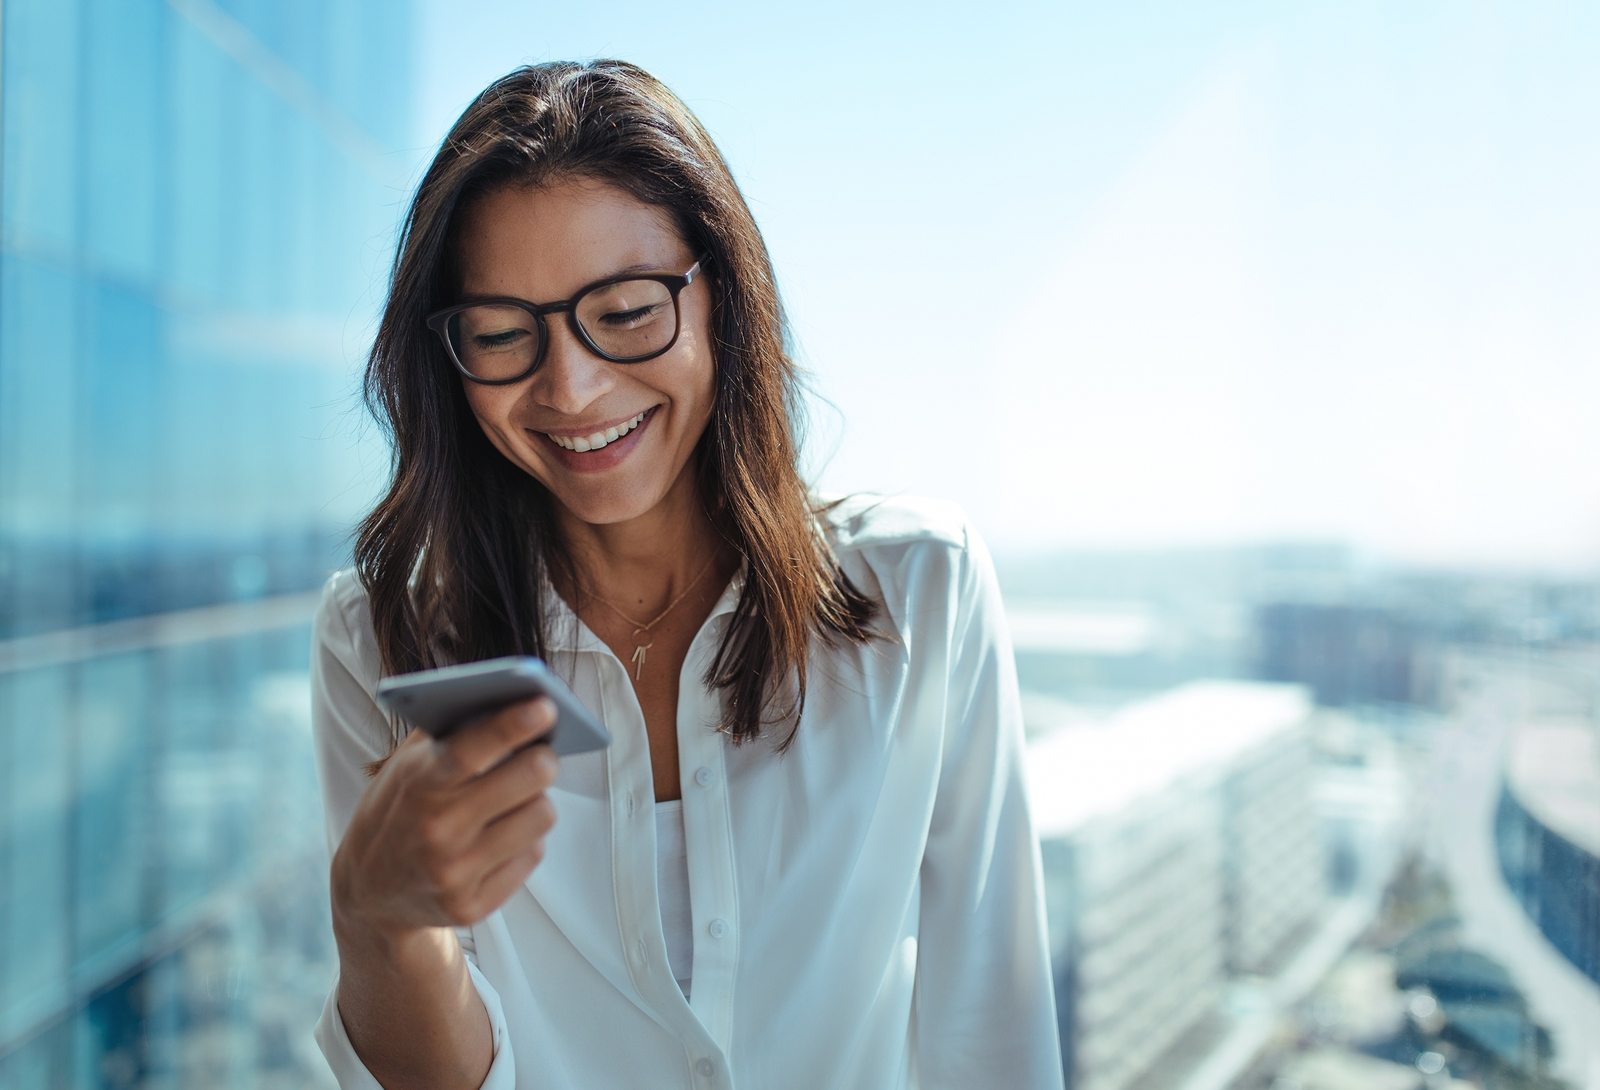 Woman wearing eyeglasses smiling while looking at her mobile phone. Young businesswoman using mobile phone for business communication.